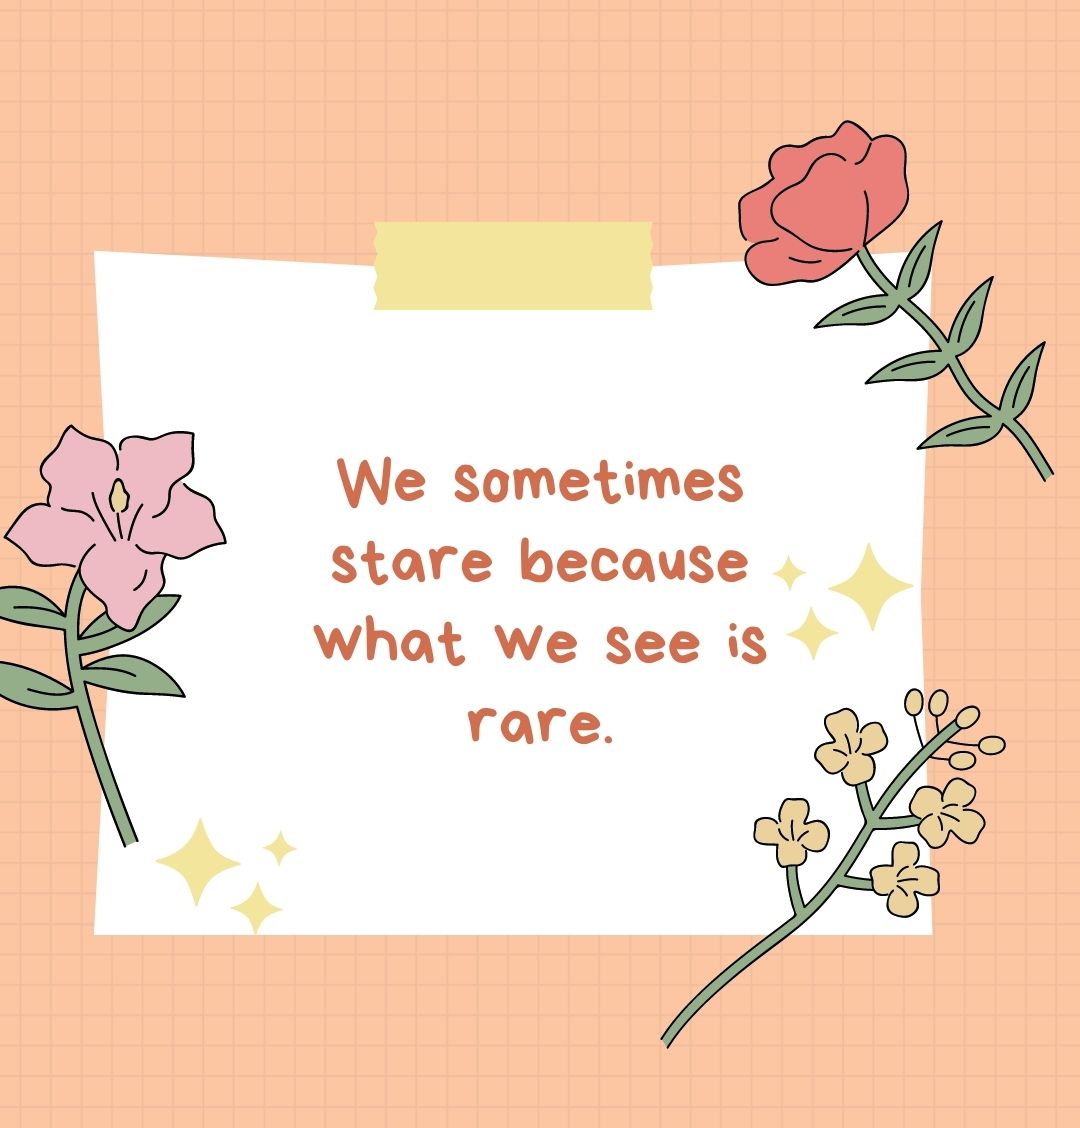 We sometimes stare because what we see is rare.